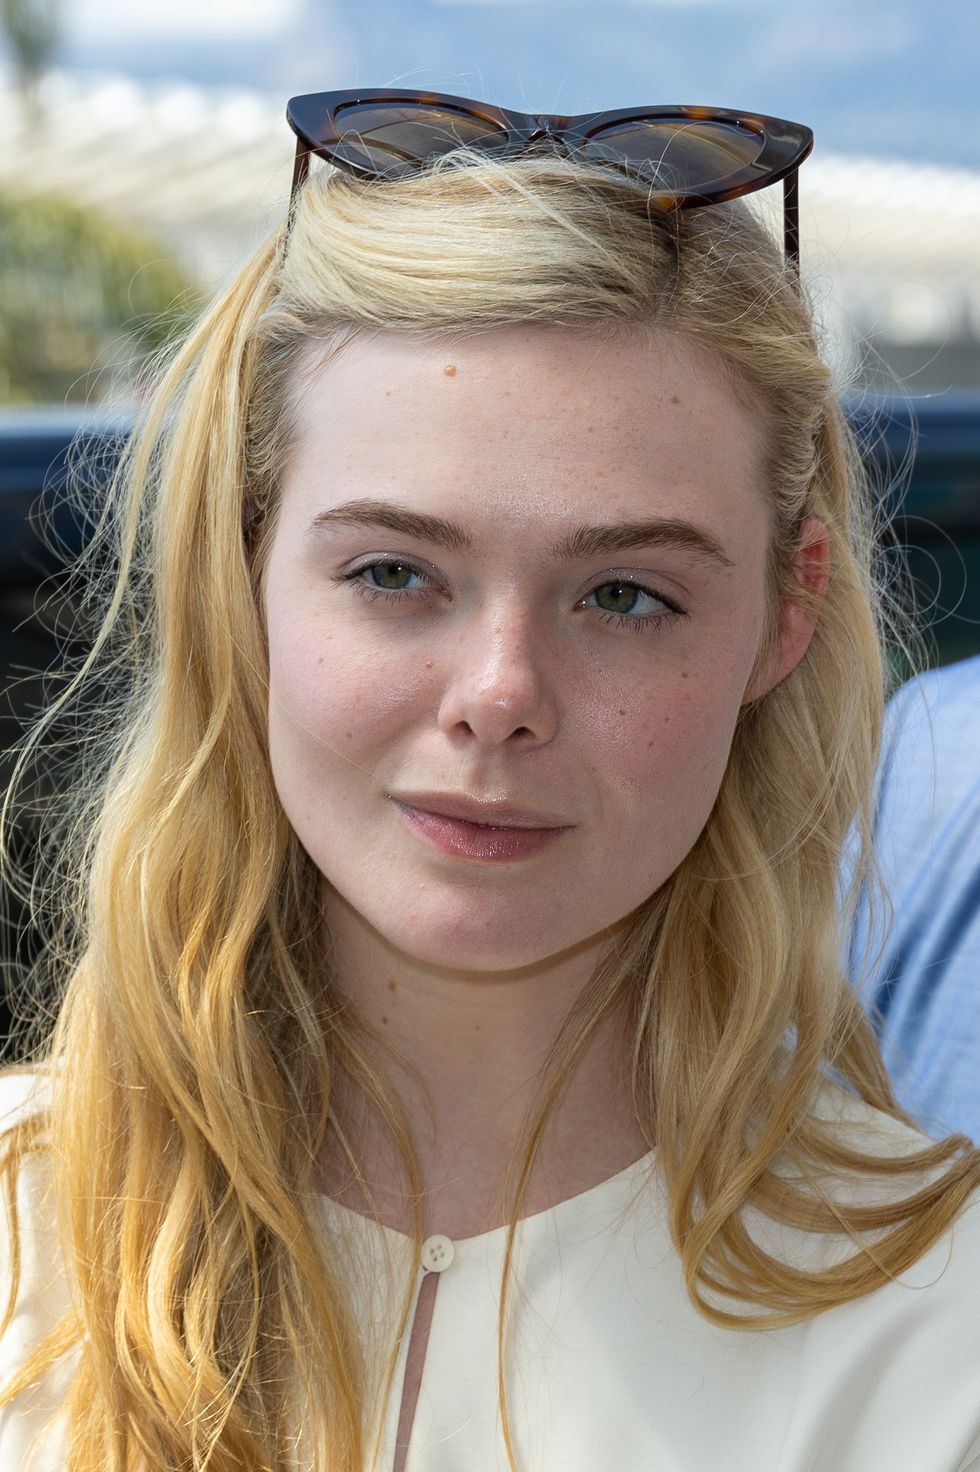 Elle Fanning Shares How Her Love of Vintage Translates to Beauty